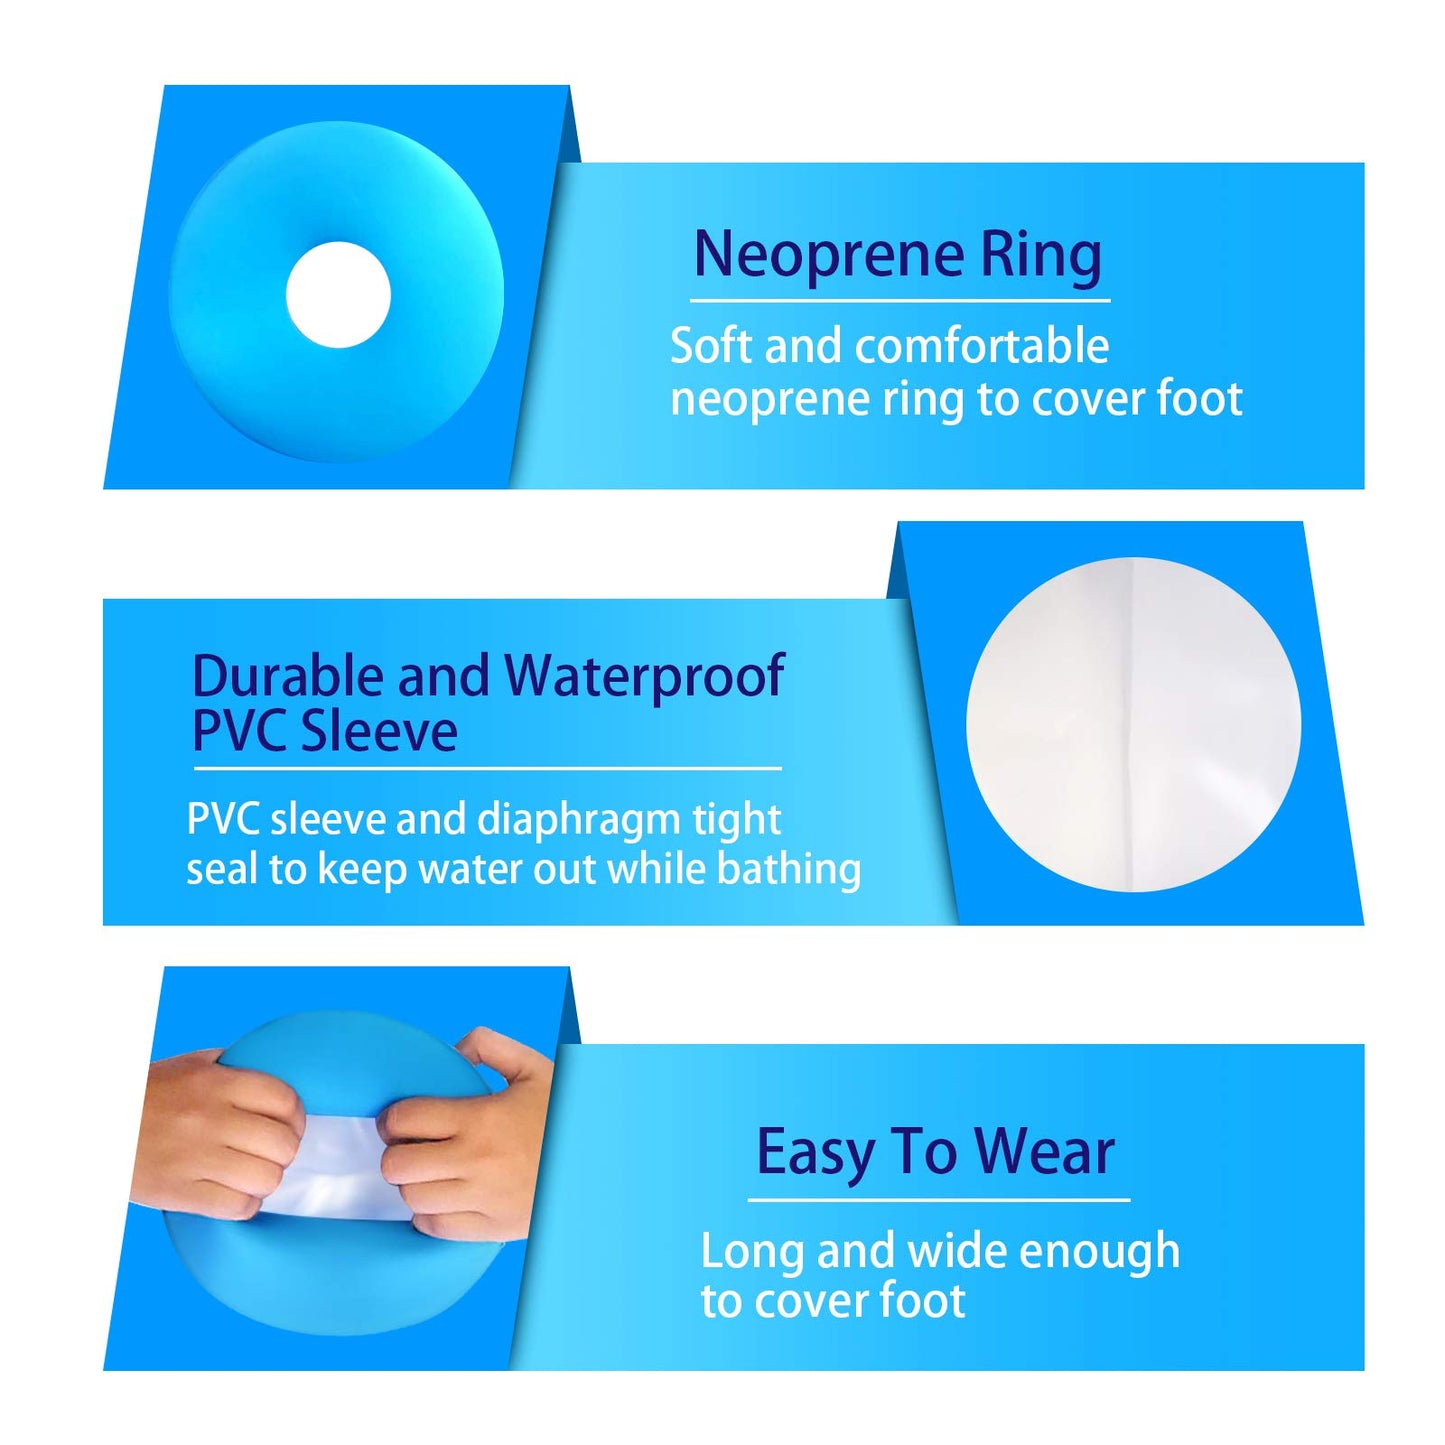 Waterproof Foot Cast Wound Cover Protector for Shower Bath, Watertight Cast Bag Covers for Broken Surgery Foot, Wound and Burns Reusable